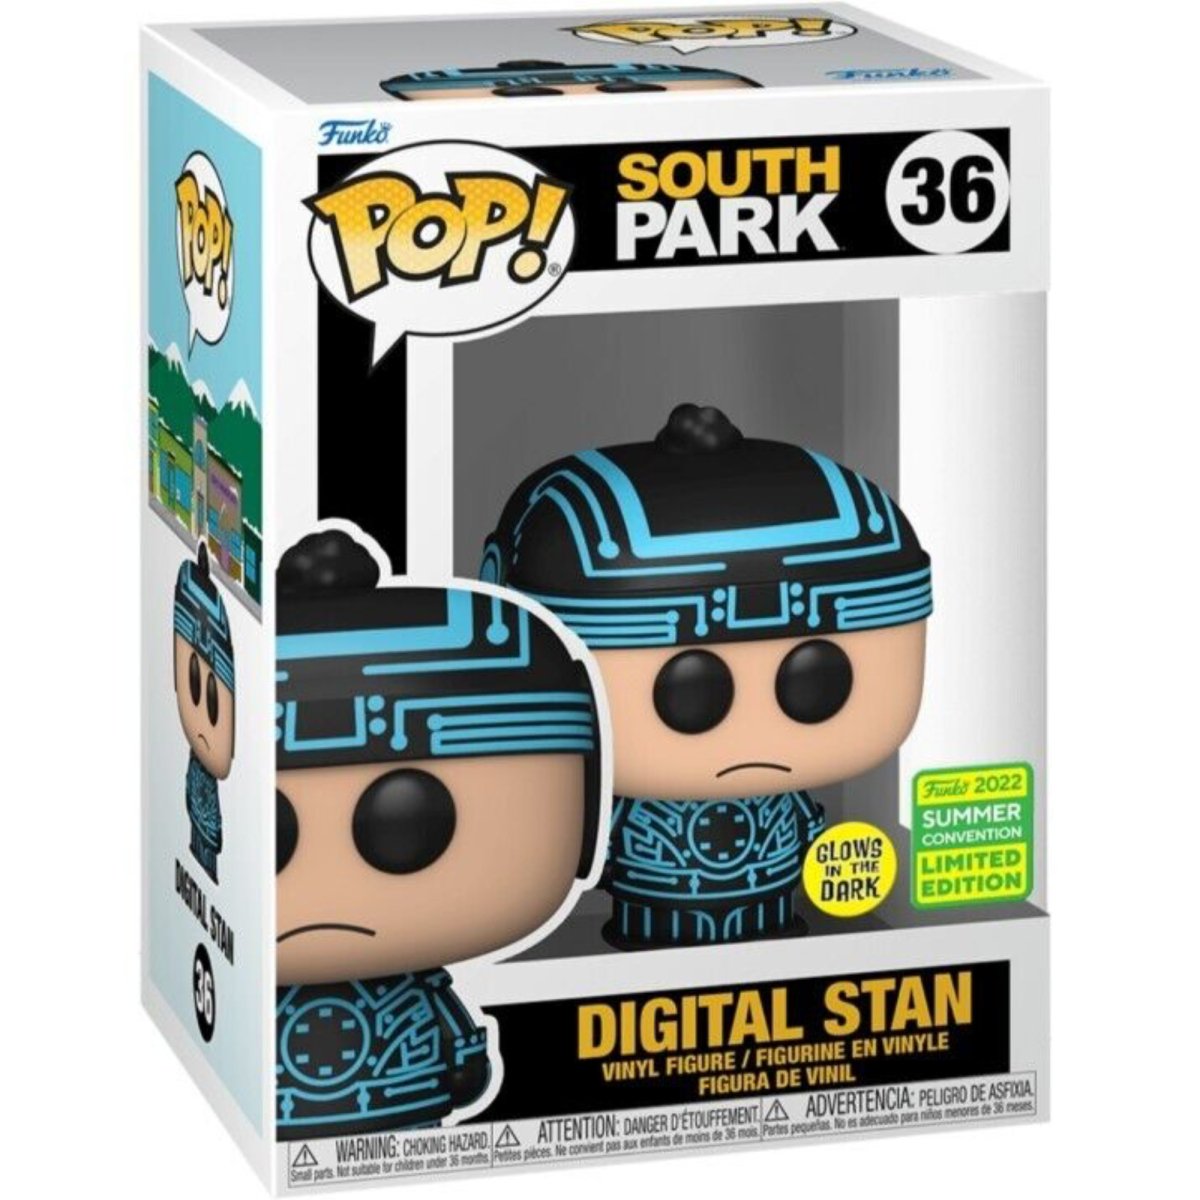 South Park - Digital Stan (Glow) (2022 Summer Convention Limited Edition) #36 - Funko Pop! Vinyl Animation - Persona Toys